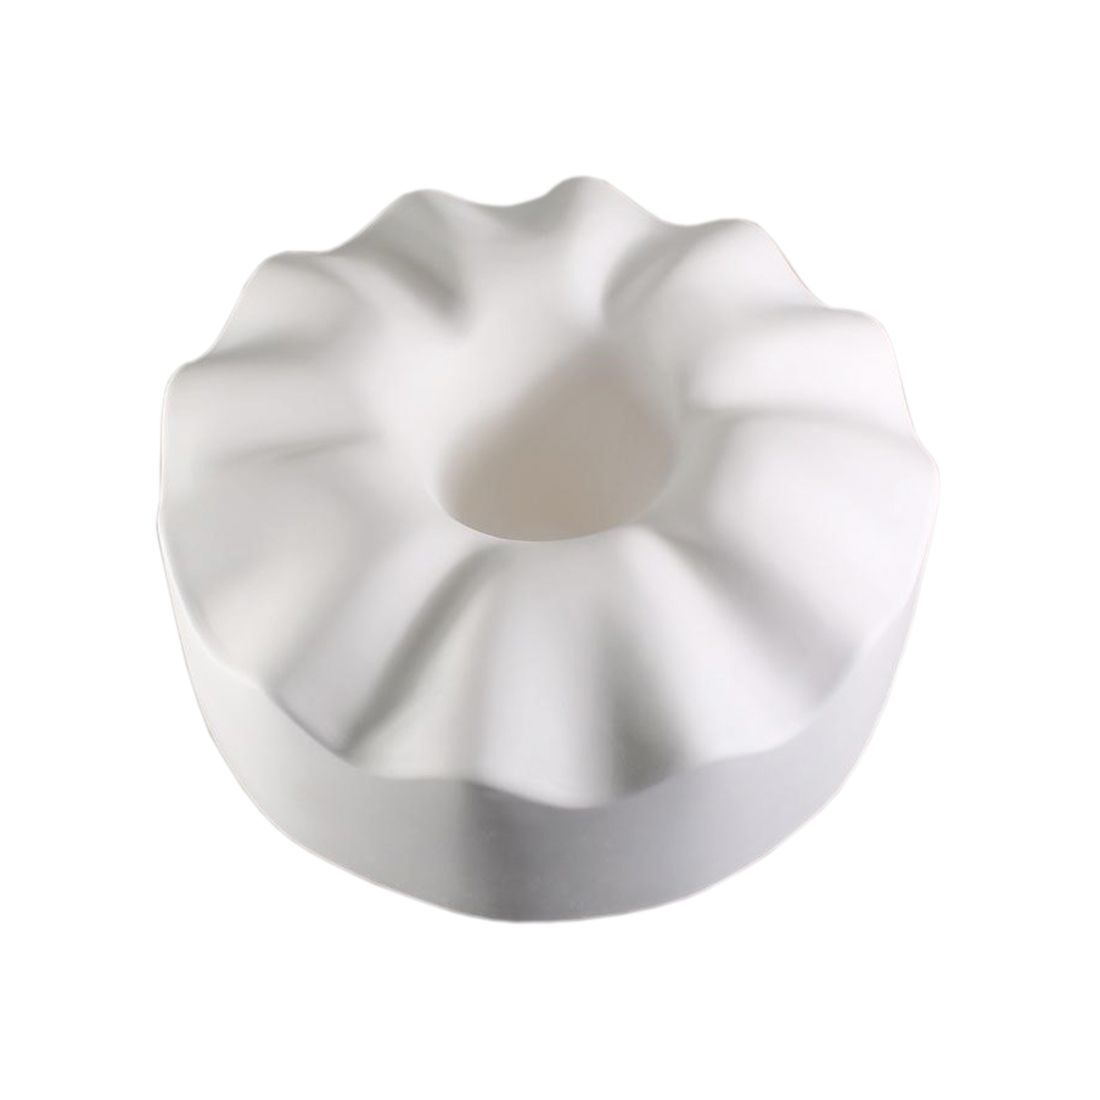 RUFFLED CONTROLLED DROP FLOWER MOLD - 10.5" by CPI